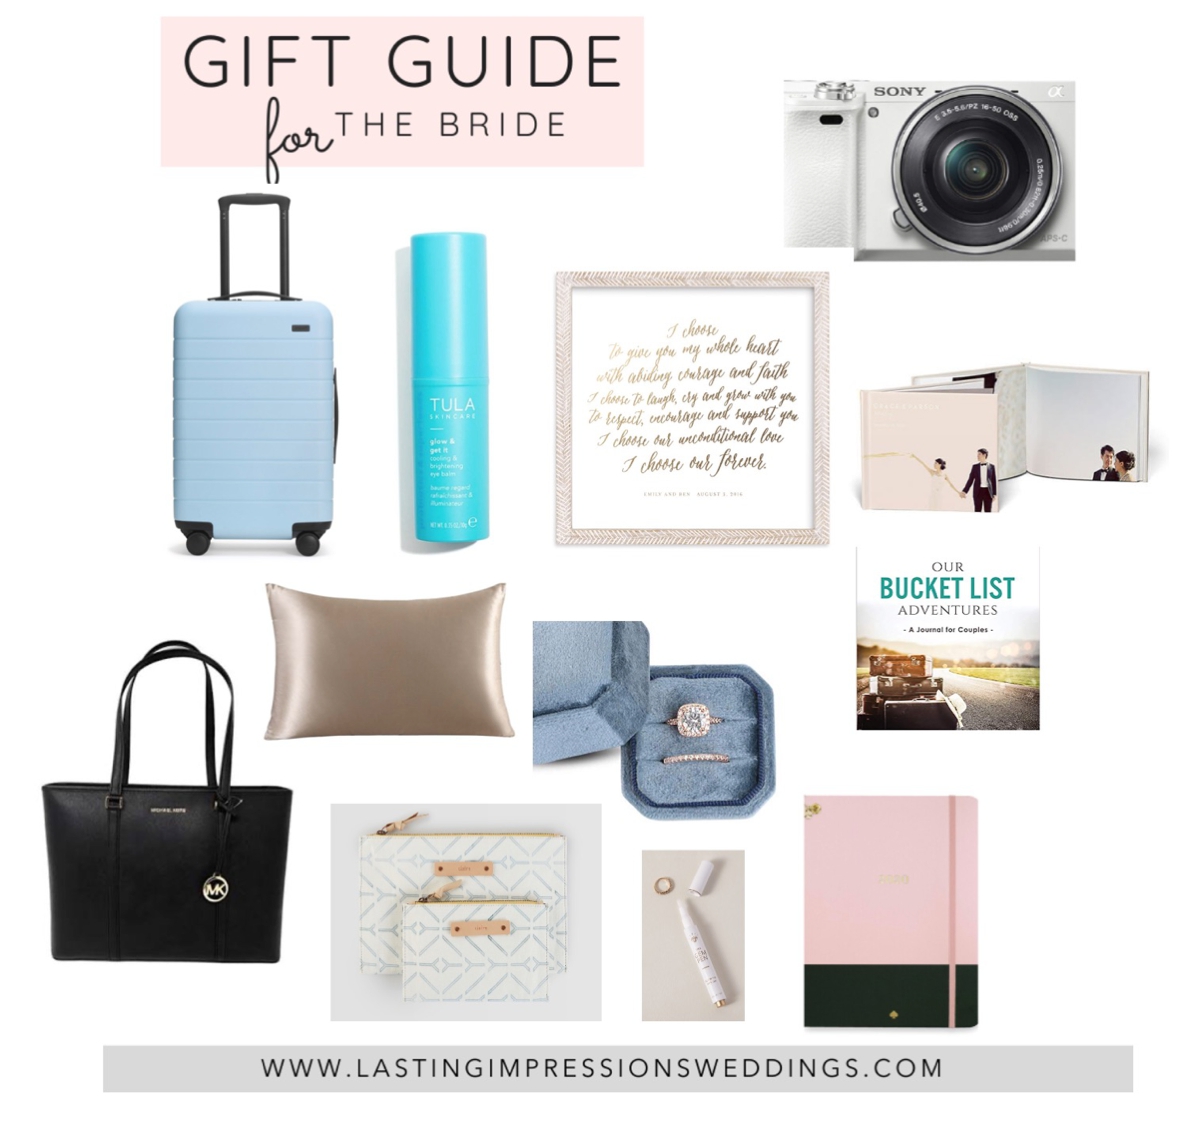 GIFT IDEAS FOR THE BRIDE